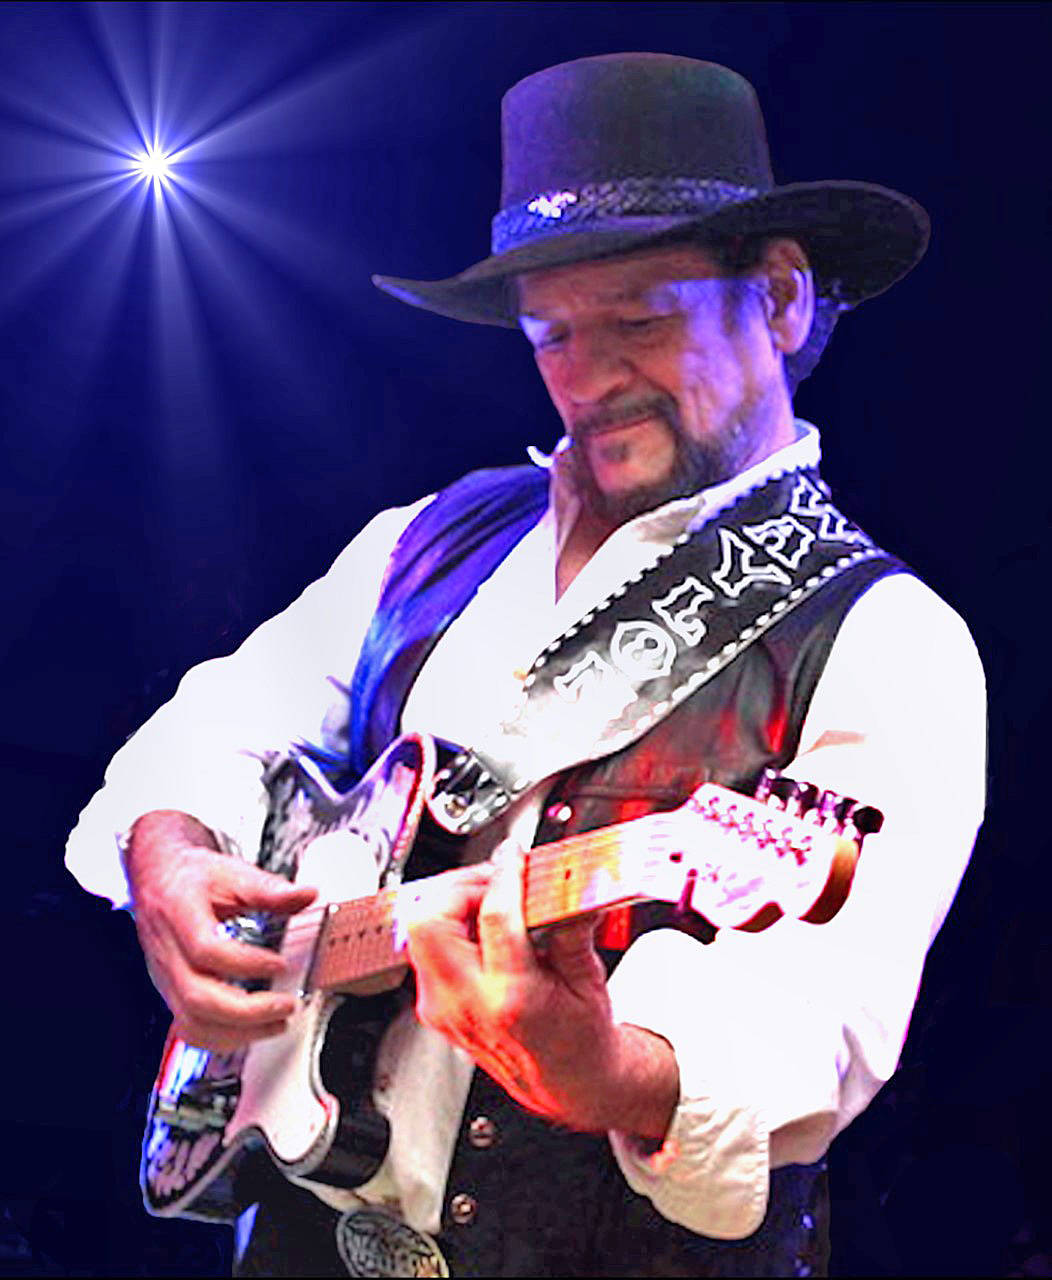 Waylonjennings Robert Rowan Remains The Same In German As It Is A Proper Name And Does Not Require Translation. Wallpaper